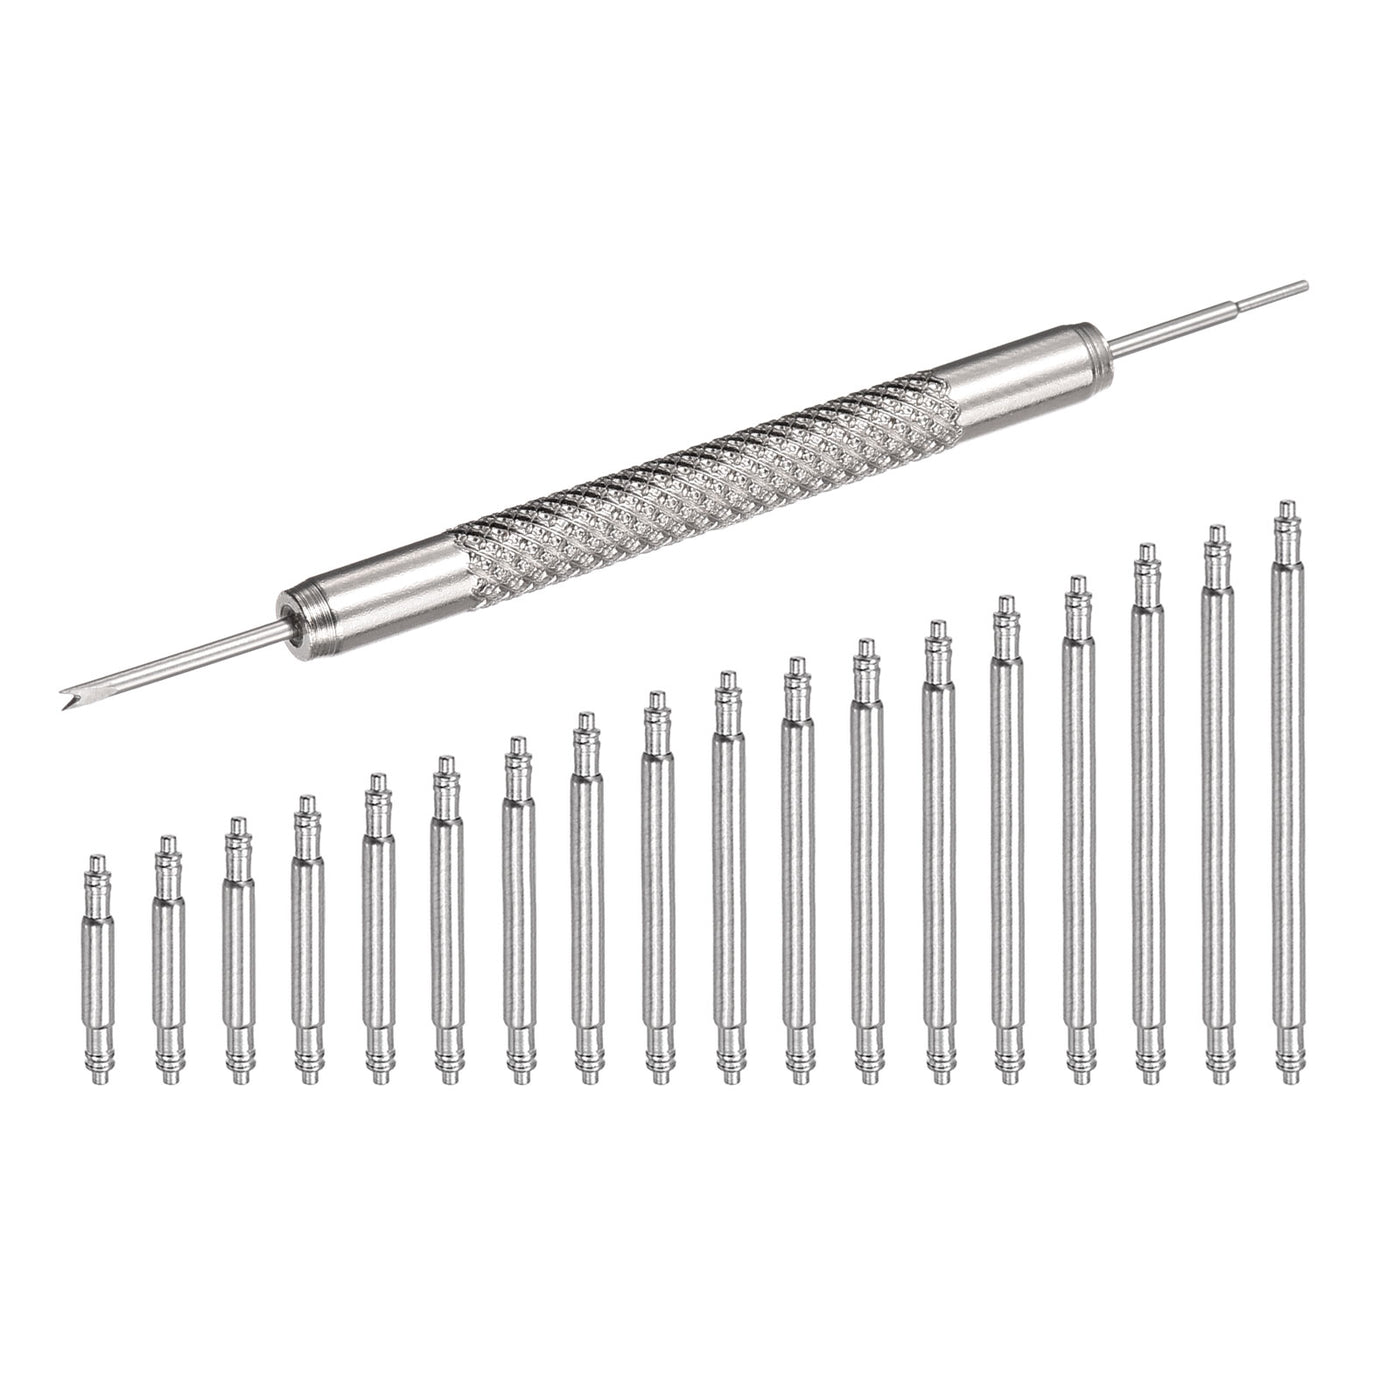 uxcell Uxcell 8-25mm Watch Band Link Pins with Spring Bar Tool 1.4mm Dia Spring Bar Pins 108pcs